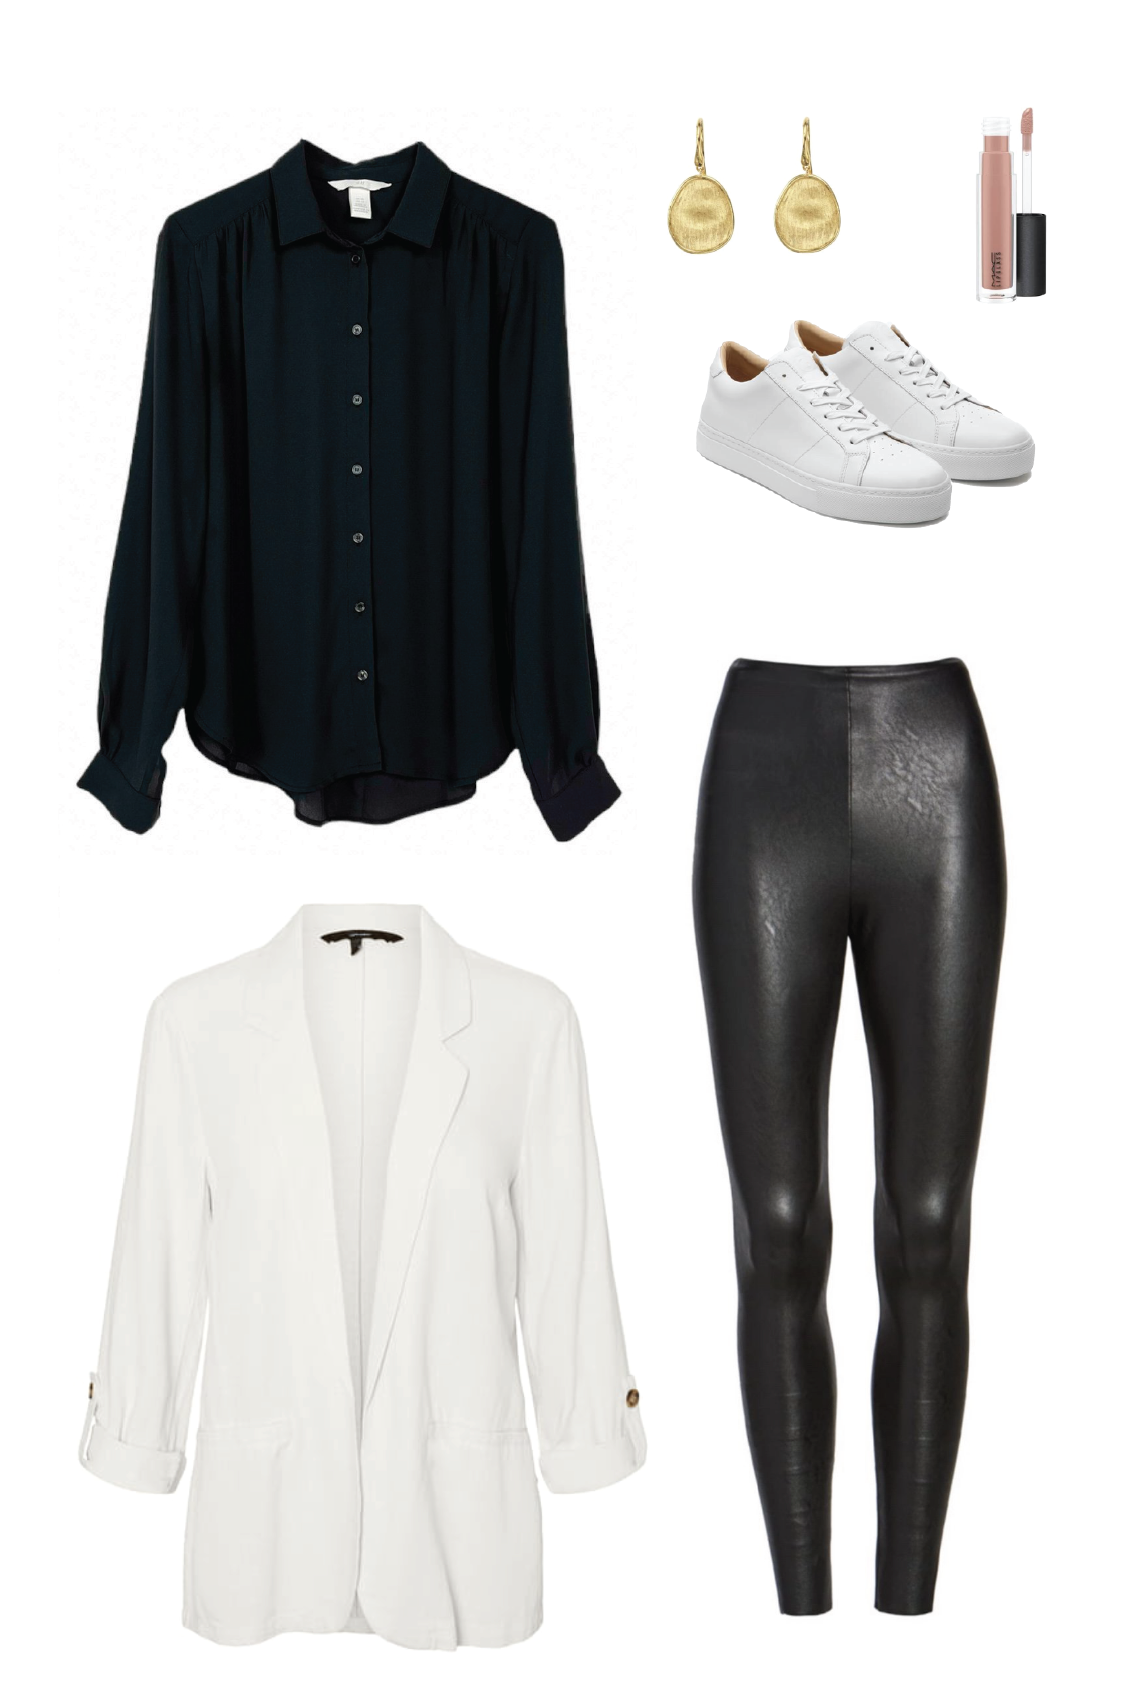 Load image into Gallery viewer, Glow Fashion Boutique black blouse styling ideas
